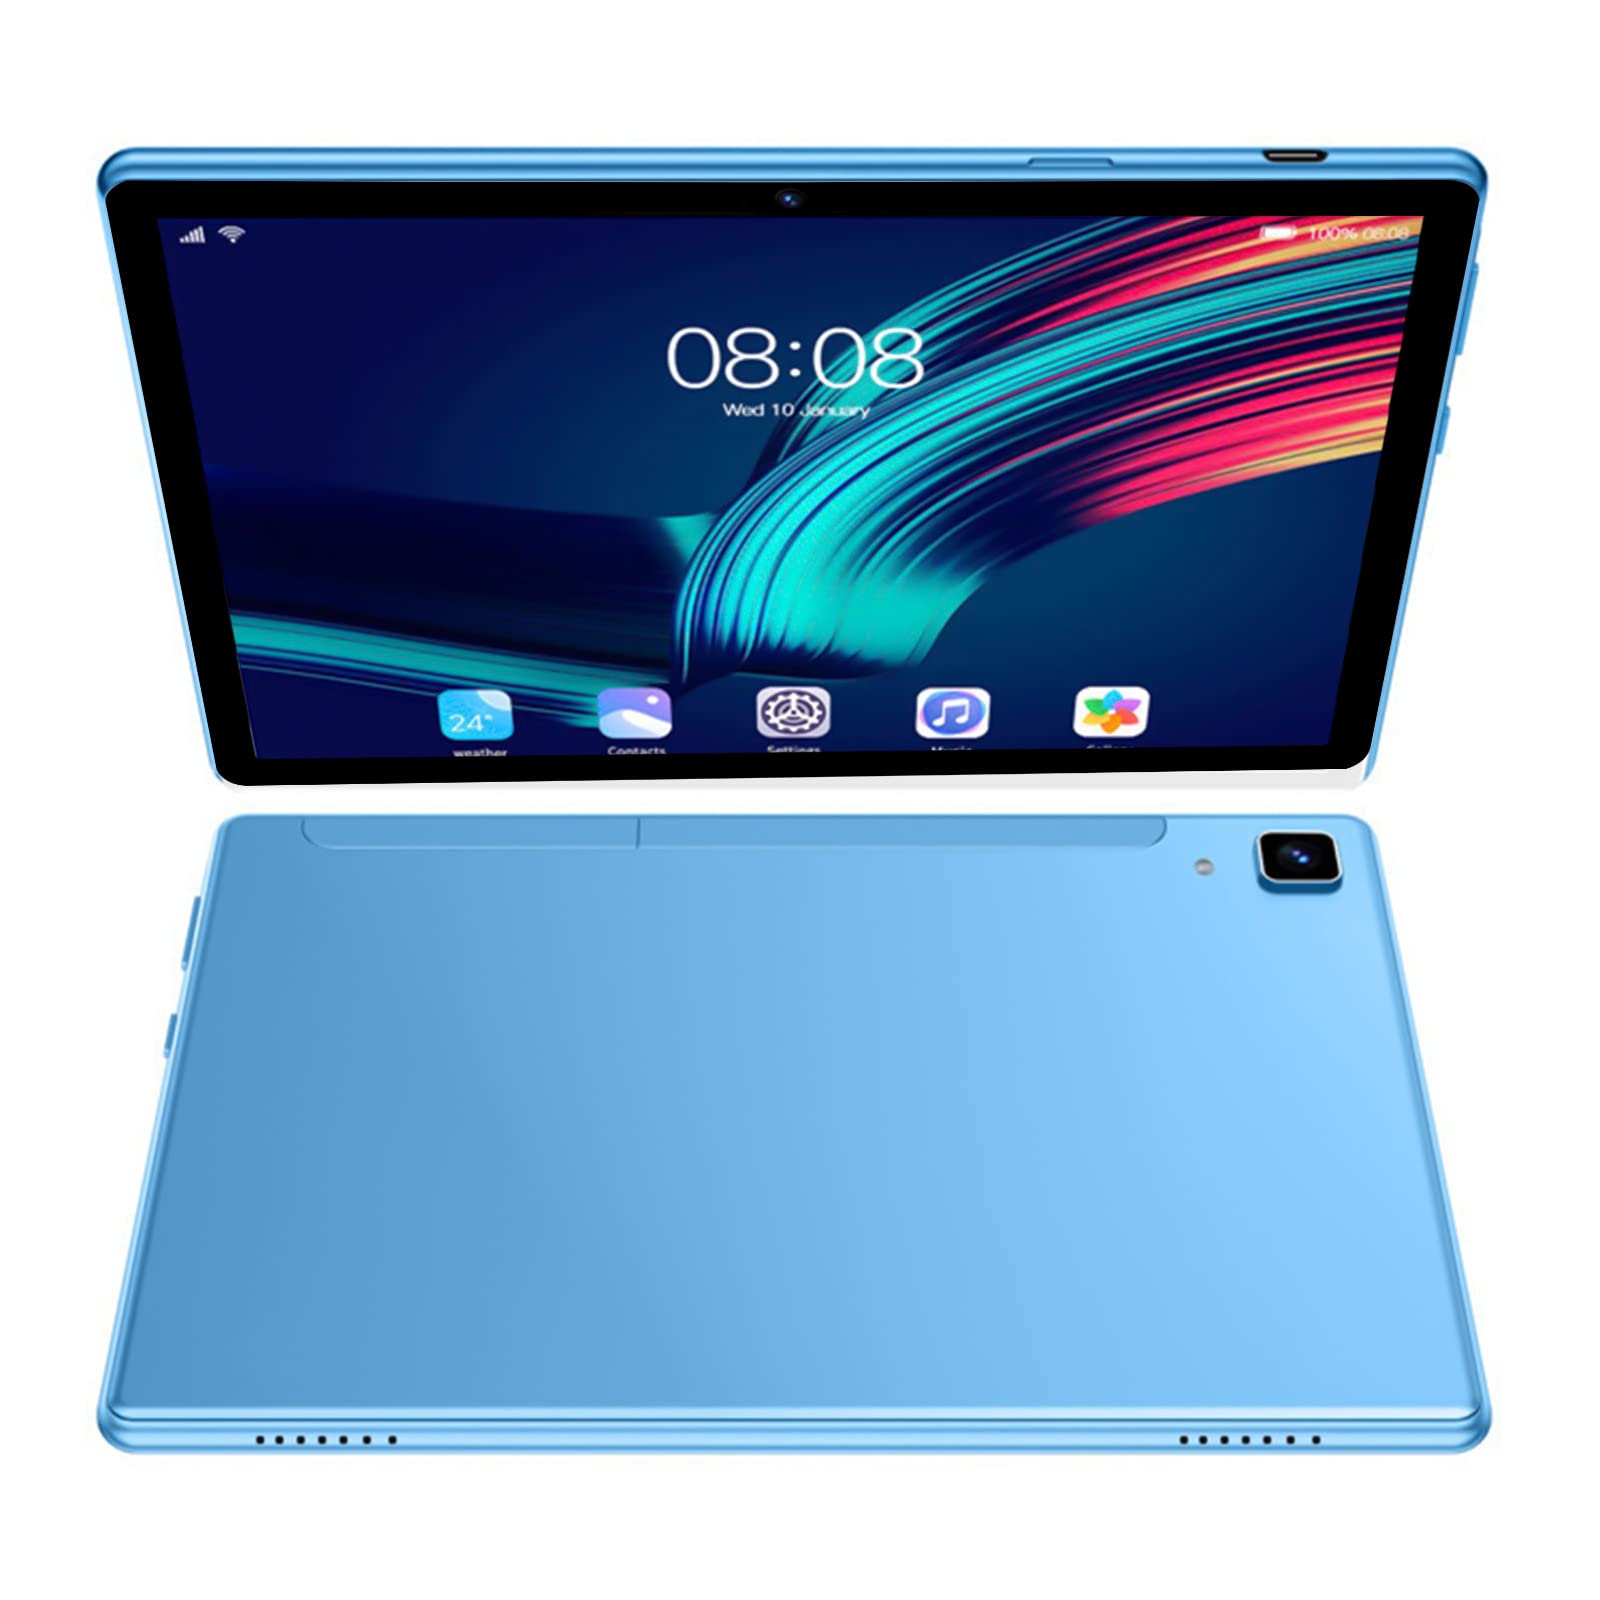 Tablet All-new Fire, 8-inch HD Display Octa-core Processor Android Tablet, 1GB RAM and 16GB ROM, TF Expansion Support Built-in WiFi Blue-tooth GPS Tablet, Dual Camera, 3000 MAH (Blue)